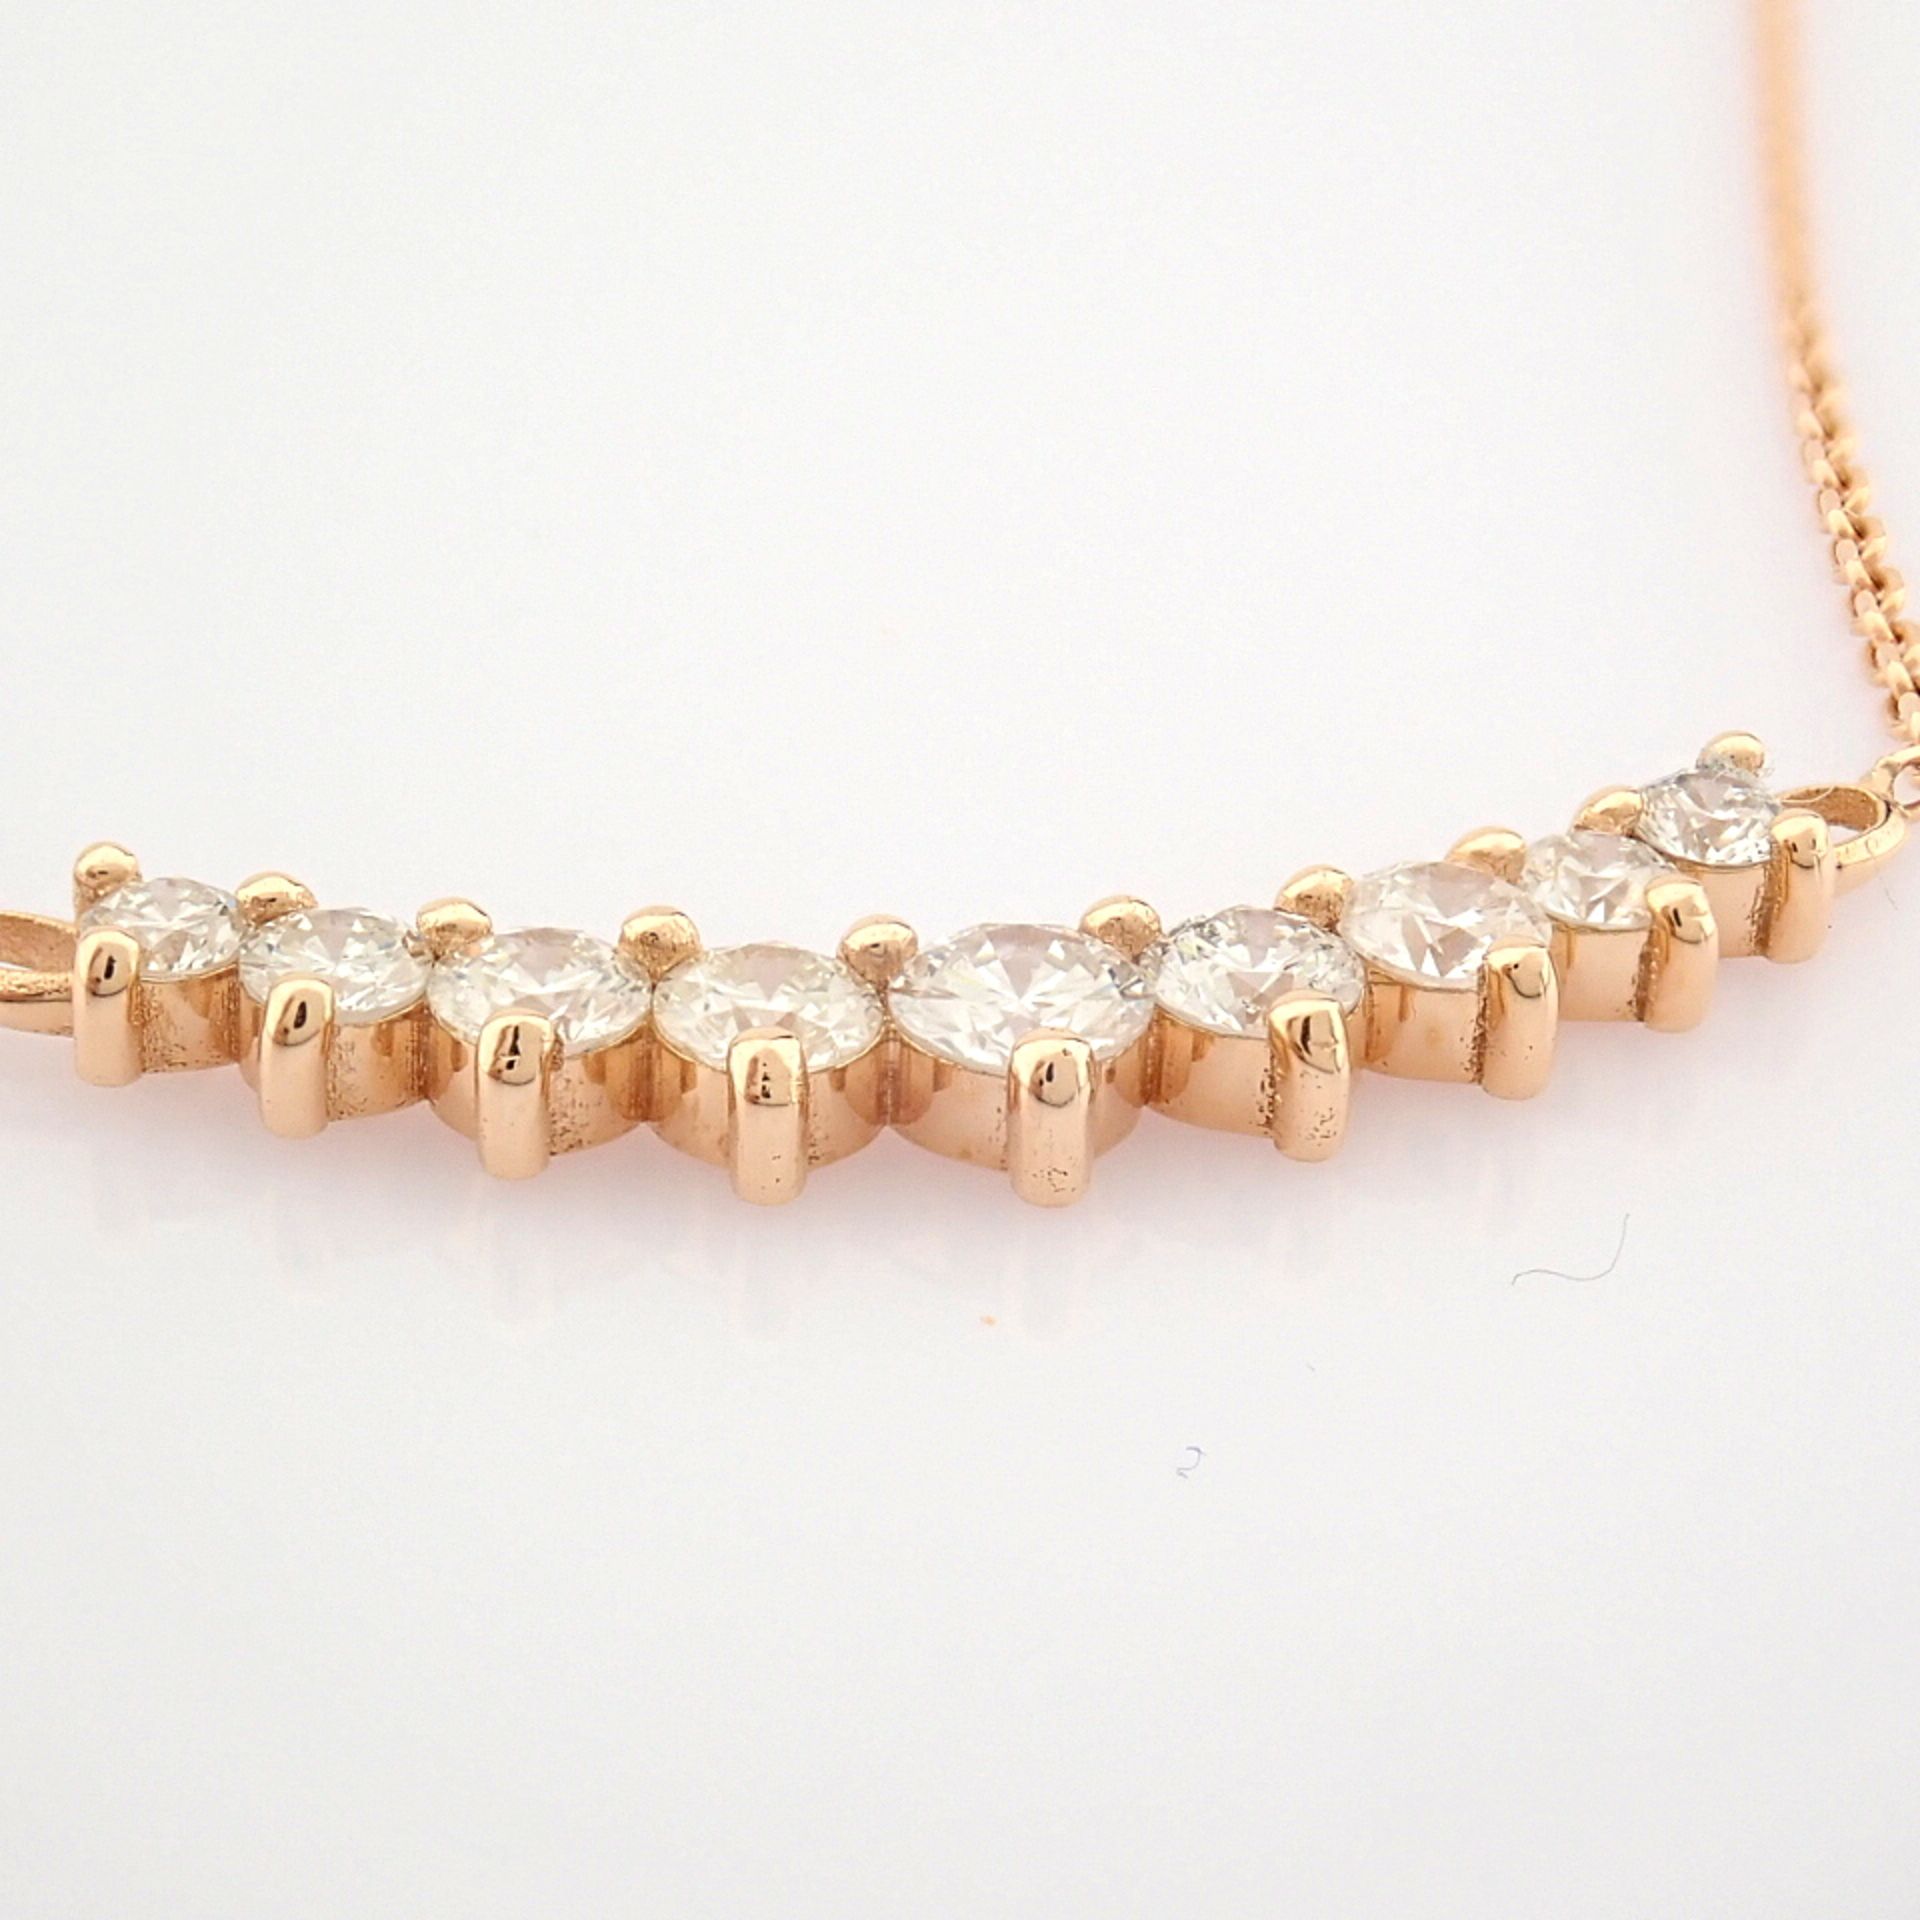 Certificated 14K Rose/Pink Gold Diamond Necklace (Total 0.56 ct Stone) - Image 8 of 9